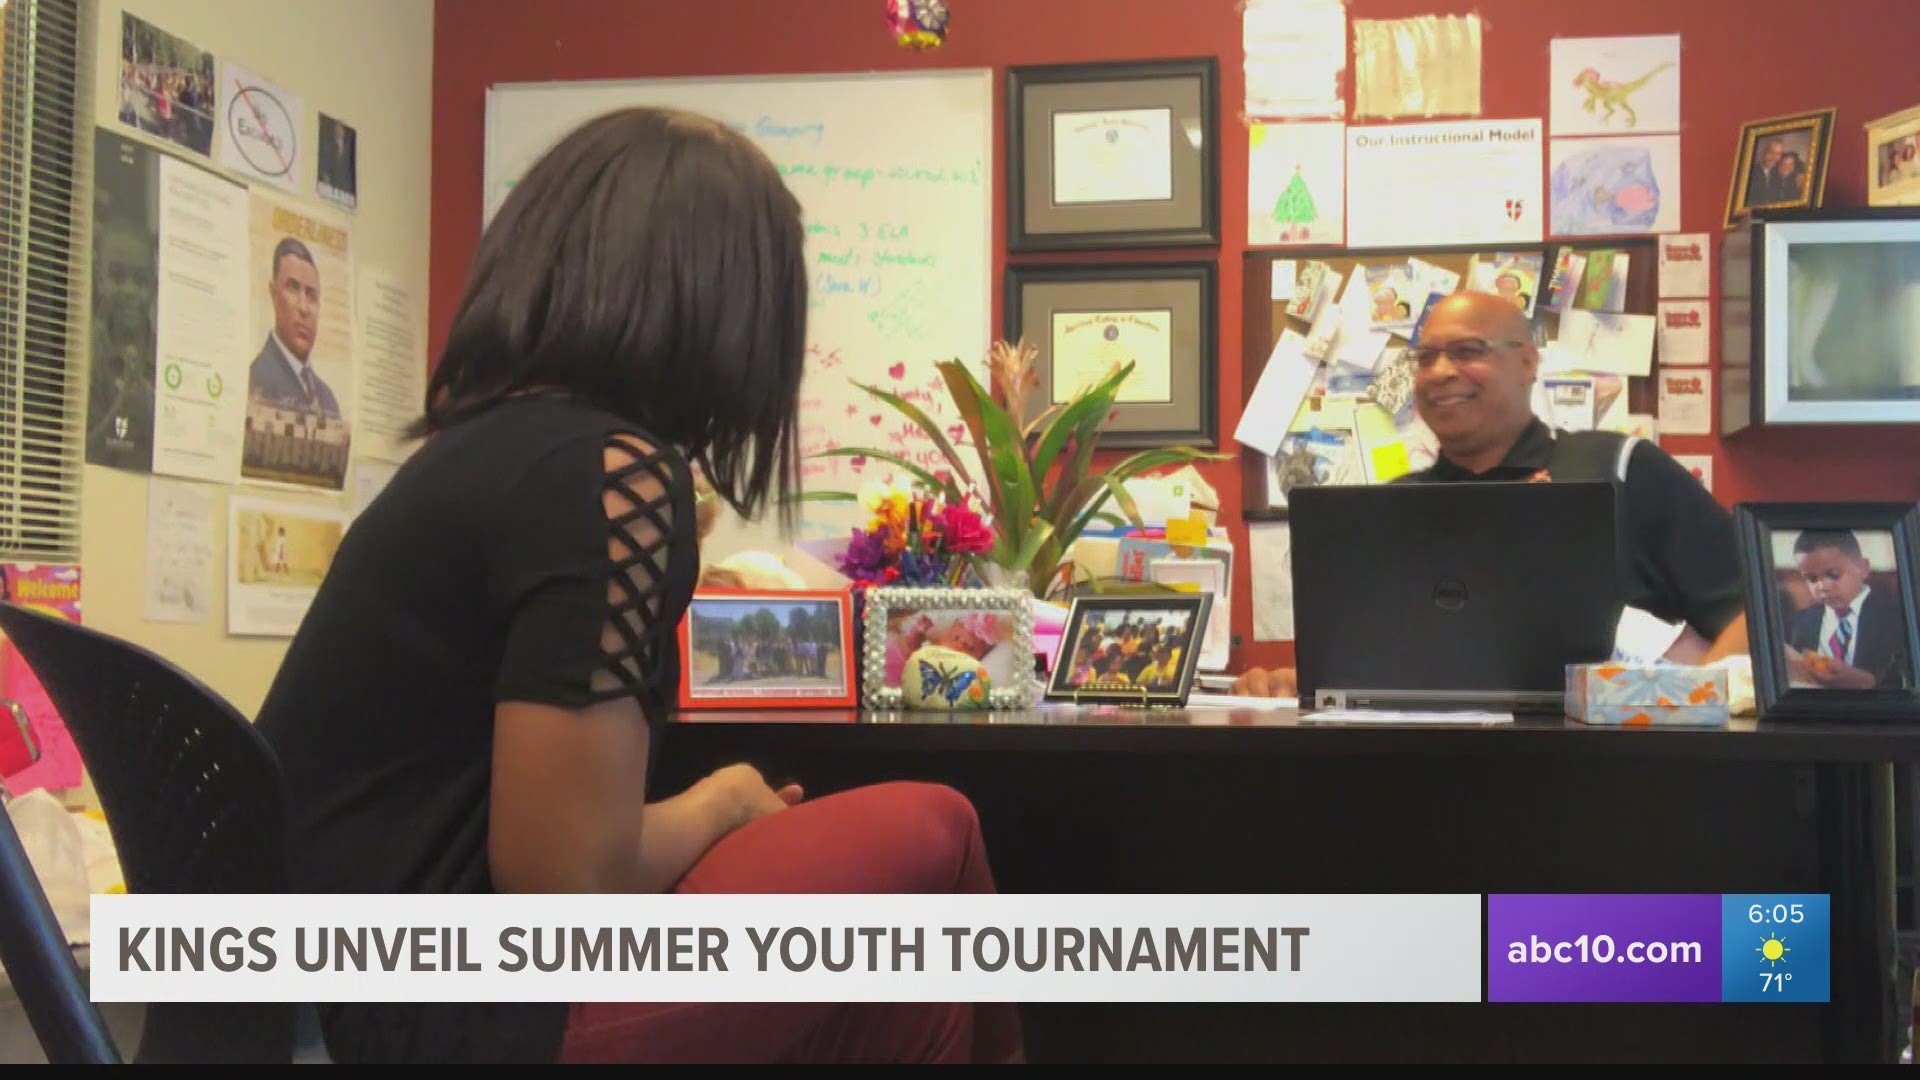 Former high school basketball coach Derek Swafford weighs in on the need for mentorship and sports-related for local youth during the summer months.